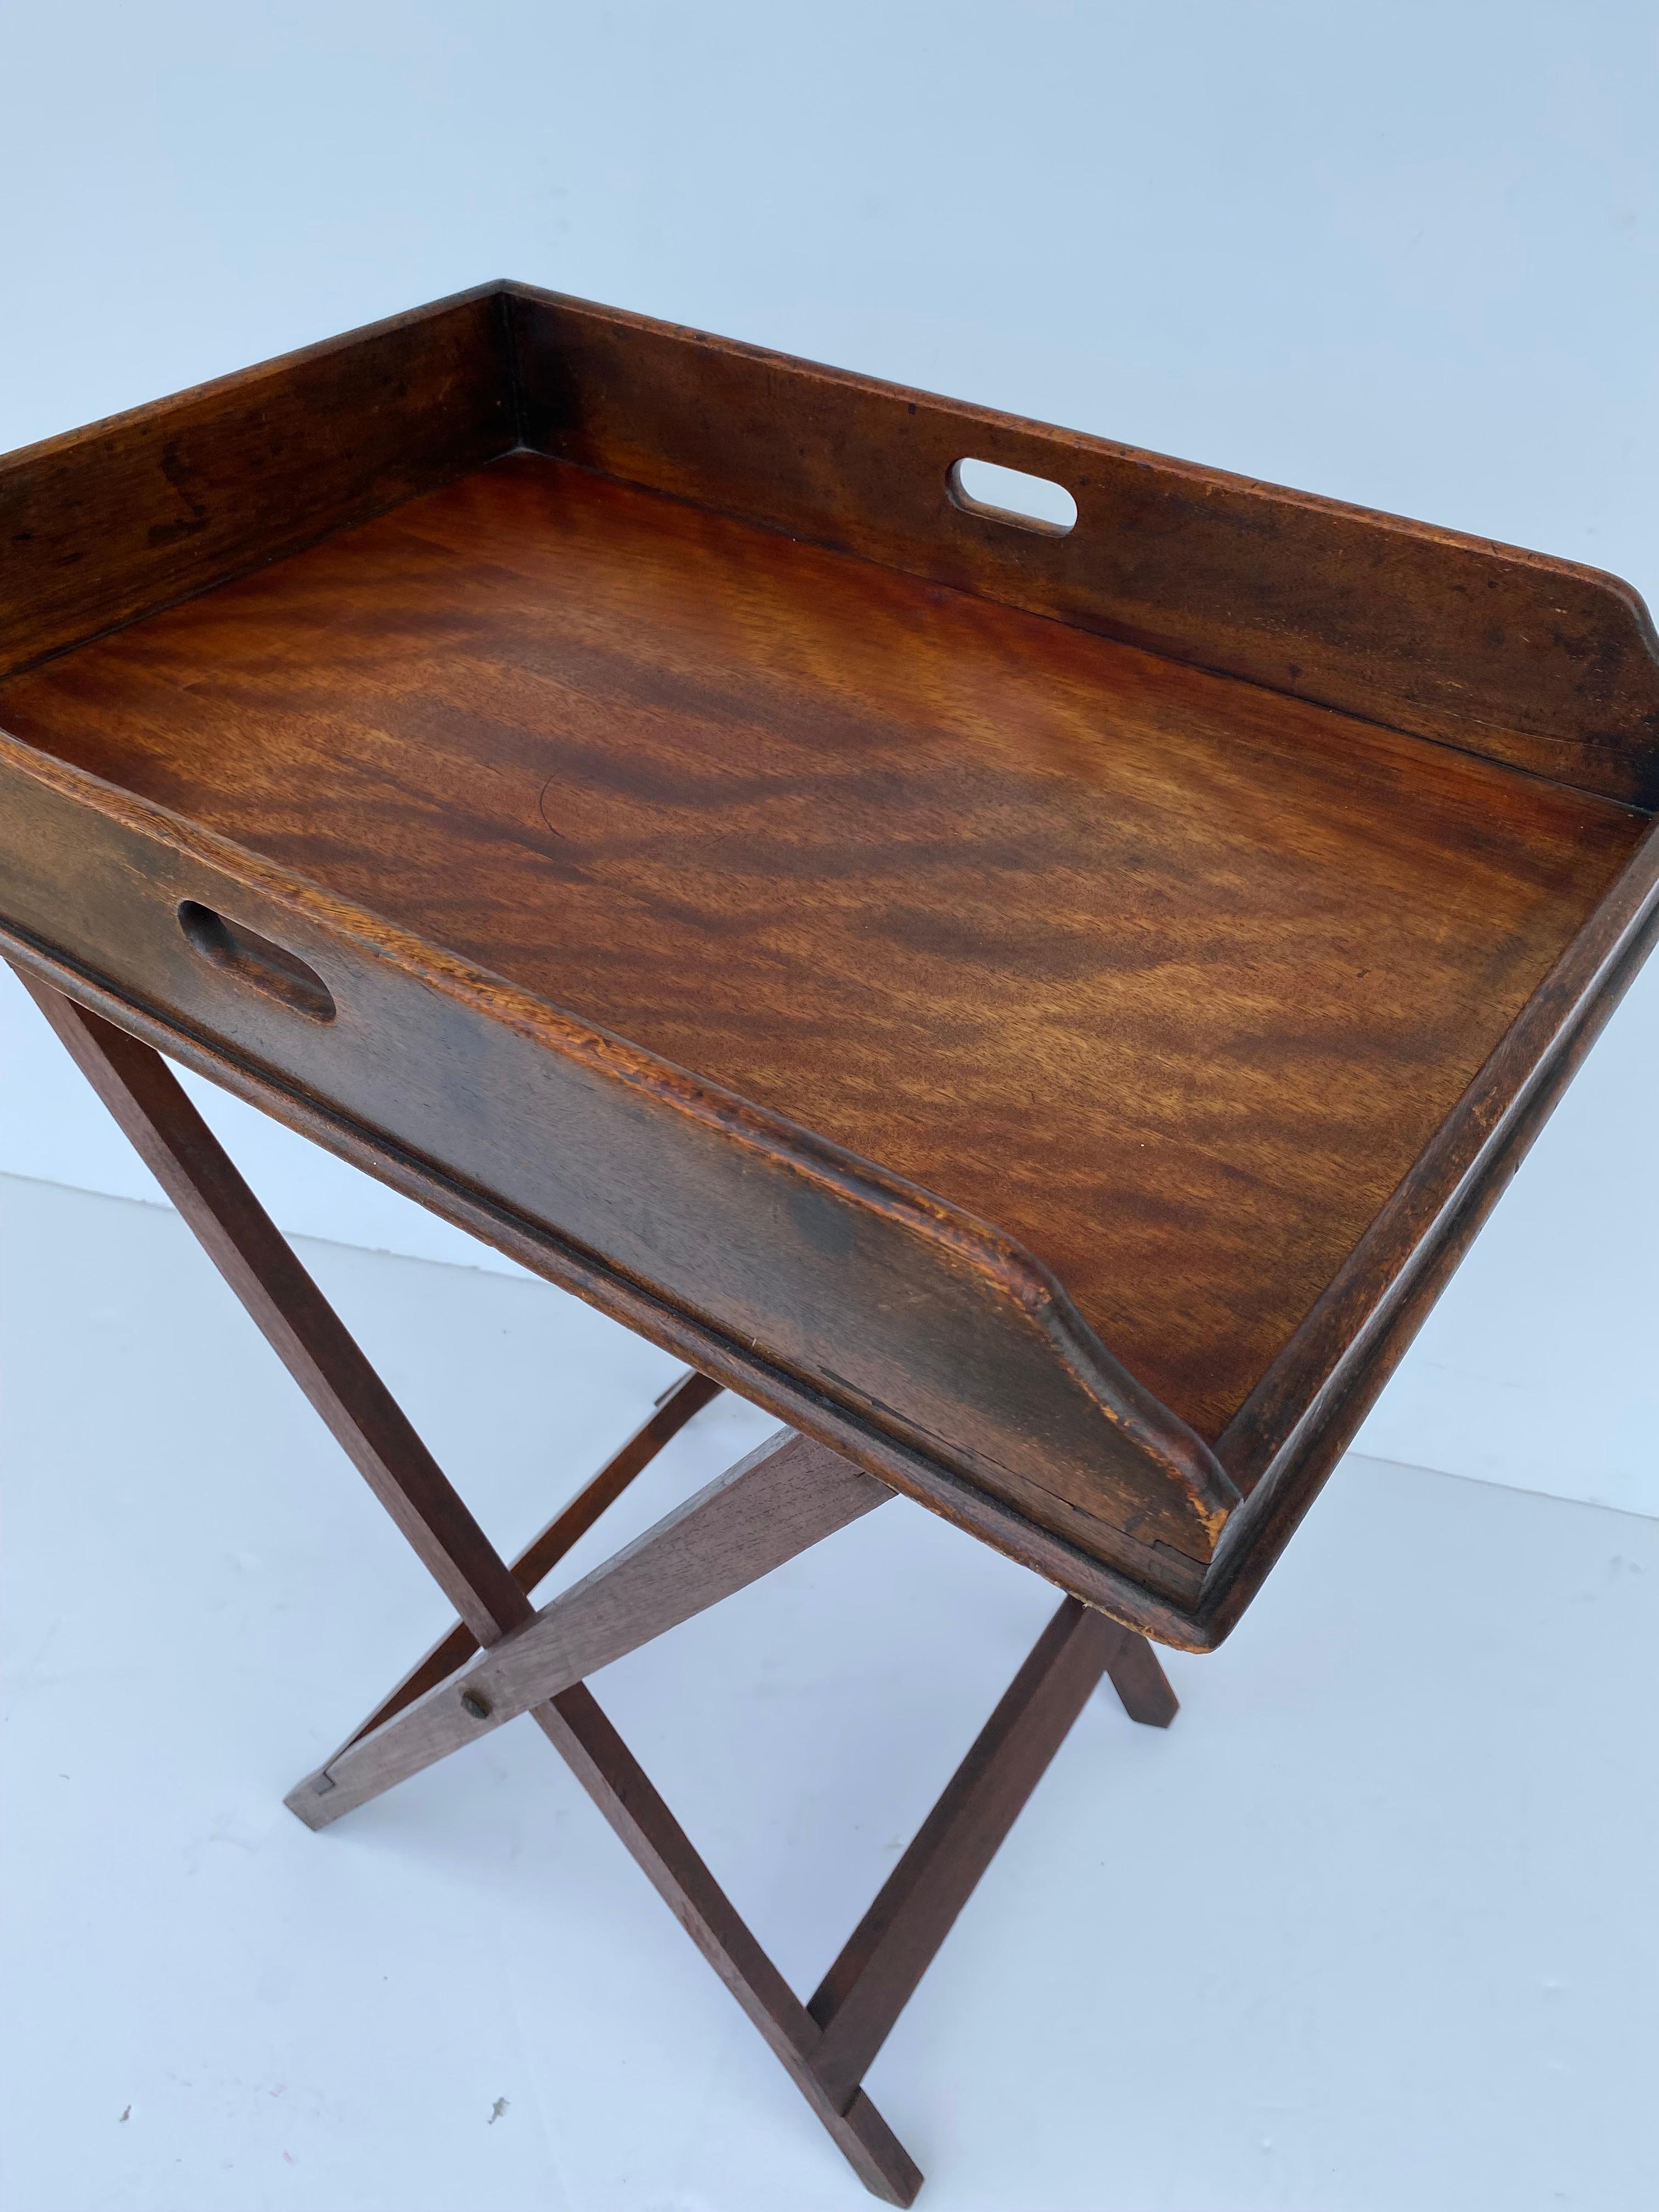 A 19th-century mahogany butler tray on a stand featuring a rectangular-shaped tray with a surrounding gallery.   On a folding X-frame stand with woven straps to accommodate the tray.